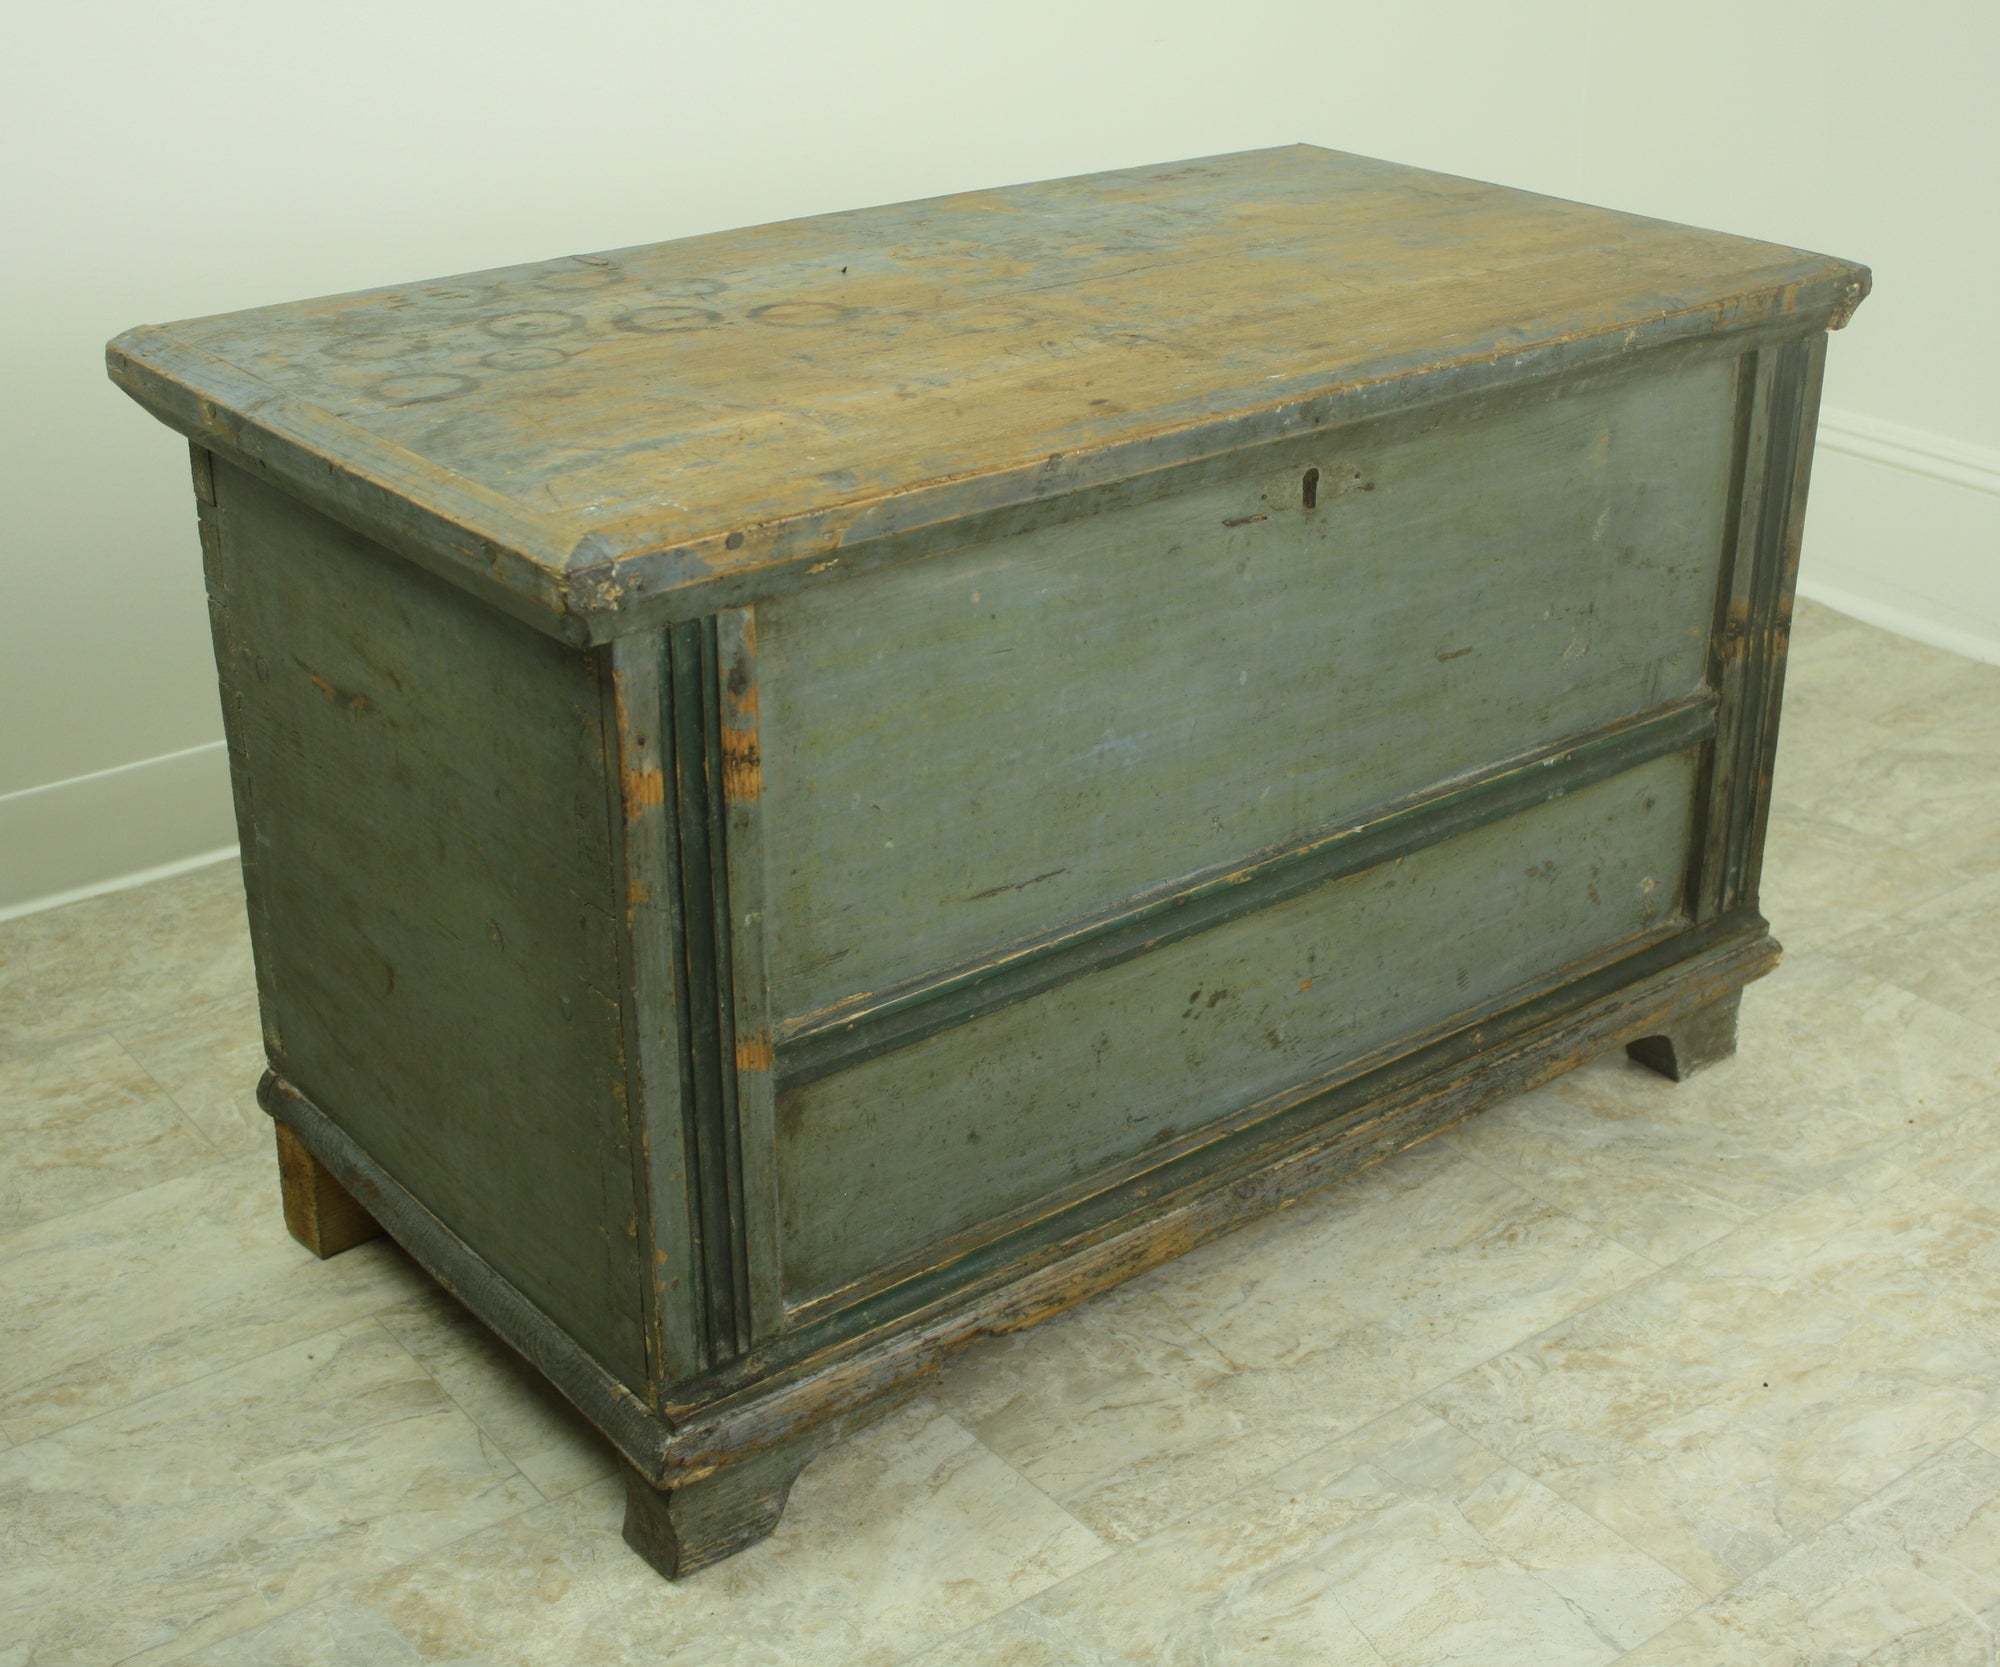 Antique Blue Painted Blanket Chest /Trunk